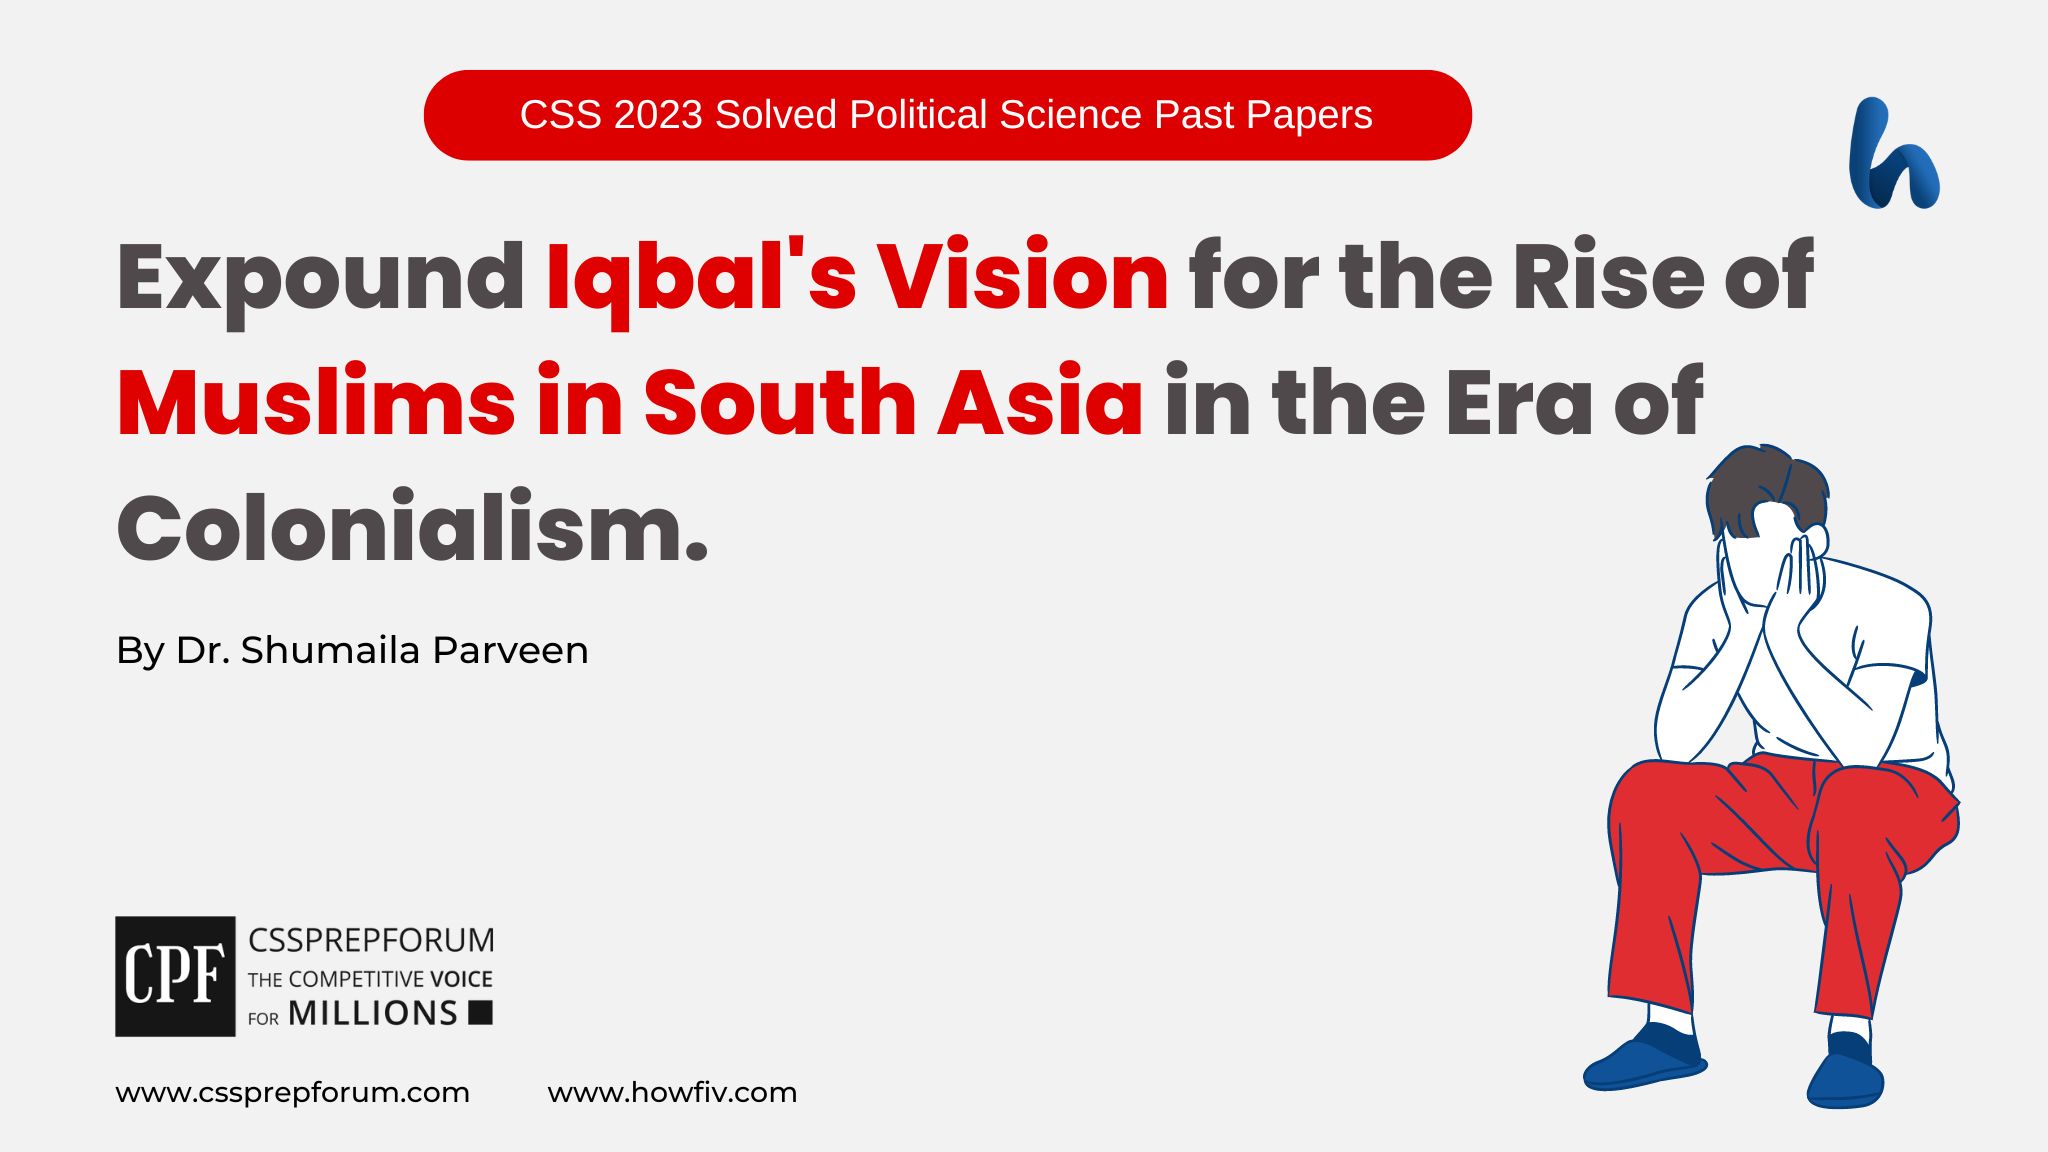 Iqbal's Vision for the Rise of Muslims in South Asia by Dr. Shumaila Parveen